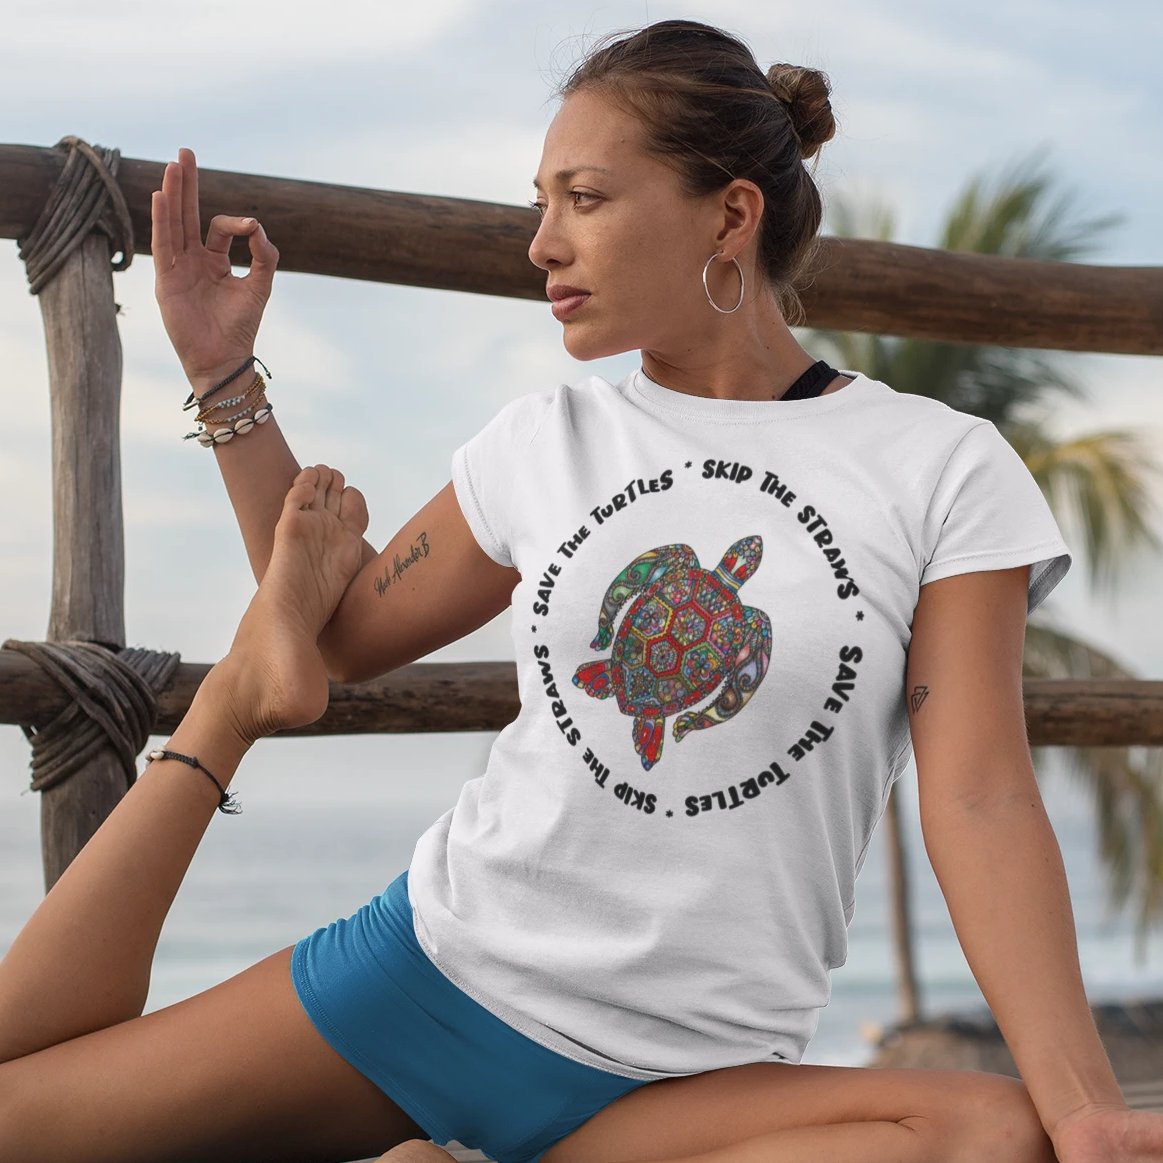 Skip The Straw, Save The Turtles: Ocean Advocate T-shirt – Where Every Choice Ripples in Comfortable Style!